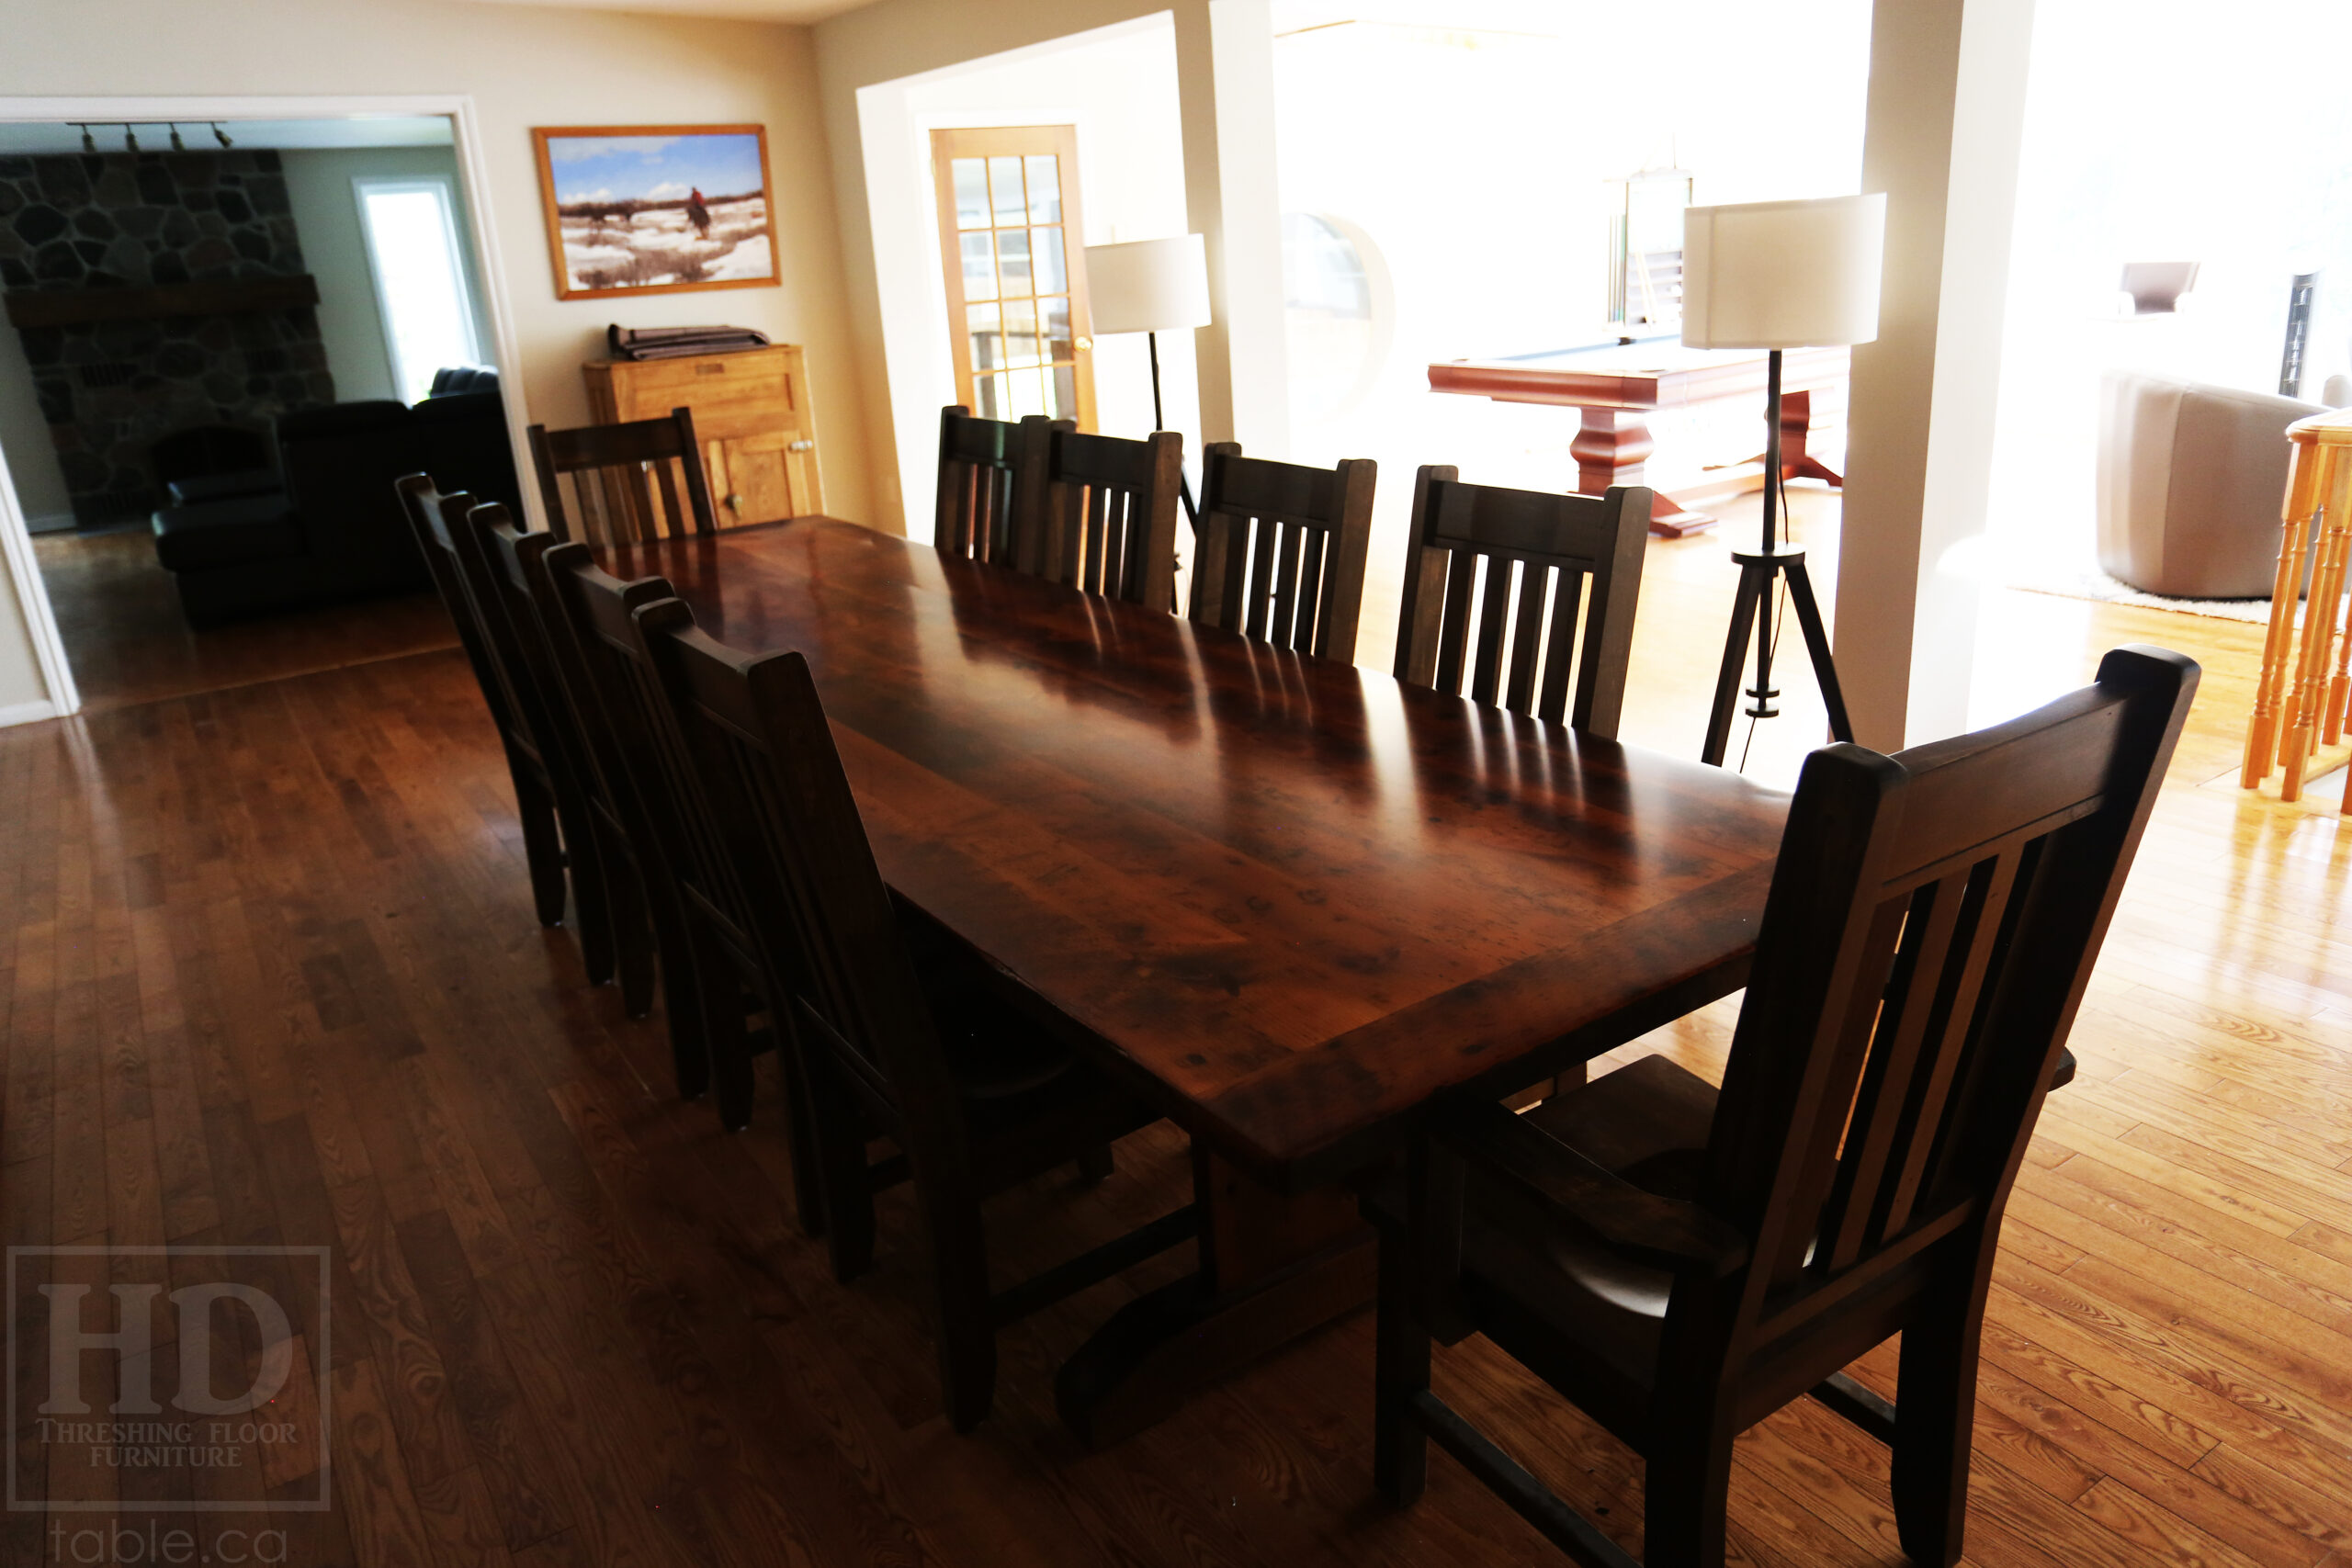 Project Summary: 12’ Reclaimed Ontario Barnwood Table we made for a Goodwood, Ontario home – 42” wide – Trestle Base - Old Growth Hemlock Threshing Floor Construction - Original edges & distressing maintained – Bread Edge Boards - Premium epoxy + satin polyurethane finish – 10 Strongback Chairs / Wormy Maple / Stained Colour of Table / Polyurethane clearcoat finish - www.table.ca